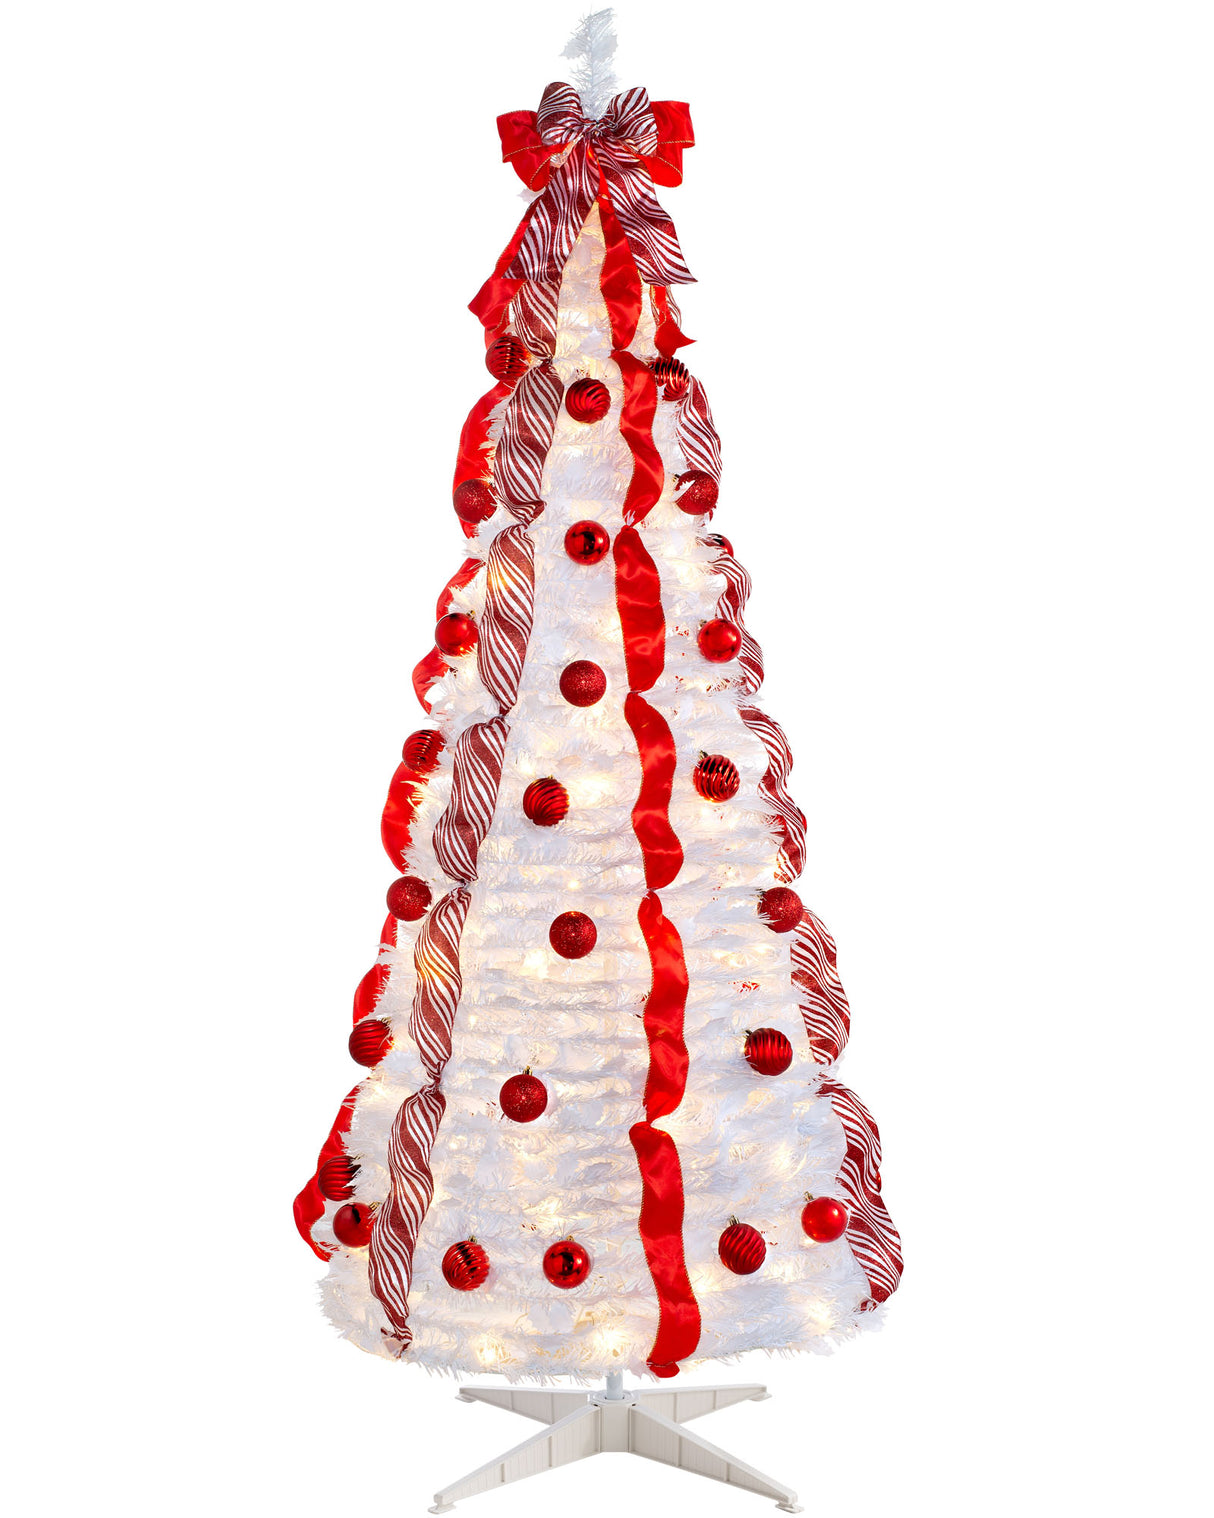 Pre-Lit Pop-Up Decorated Christmas Tree, Red/White, 6 ft